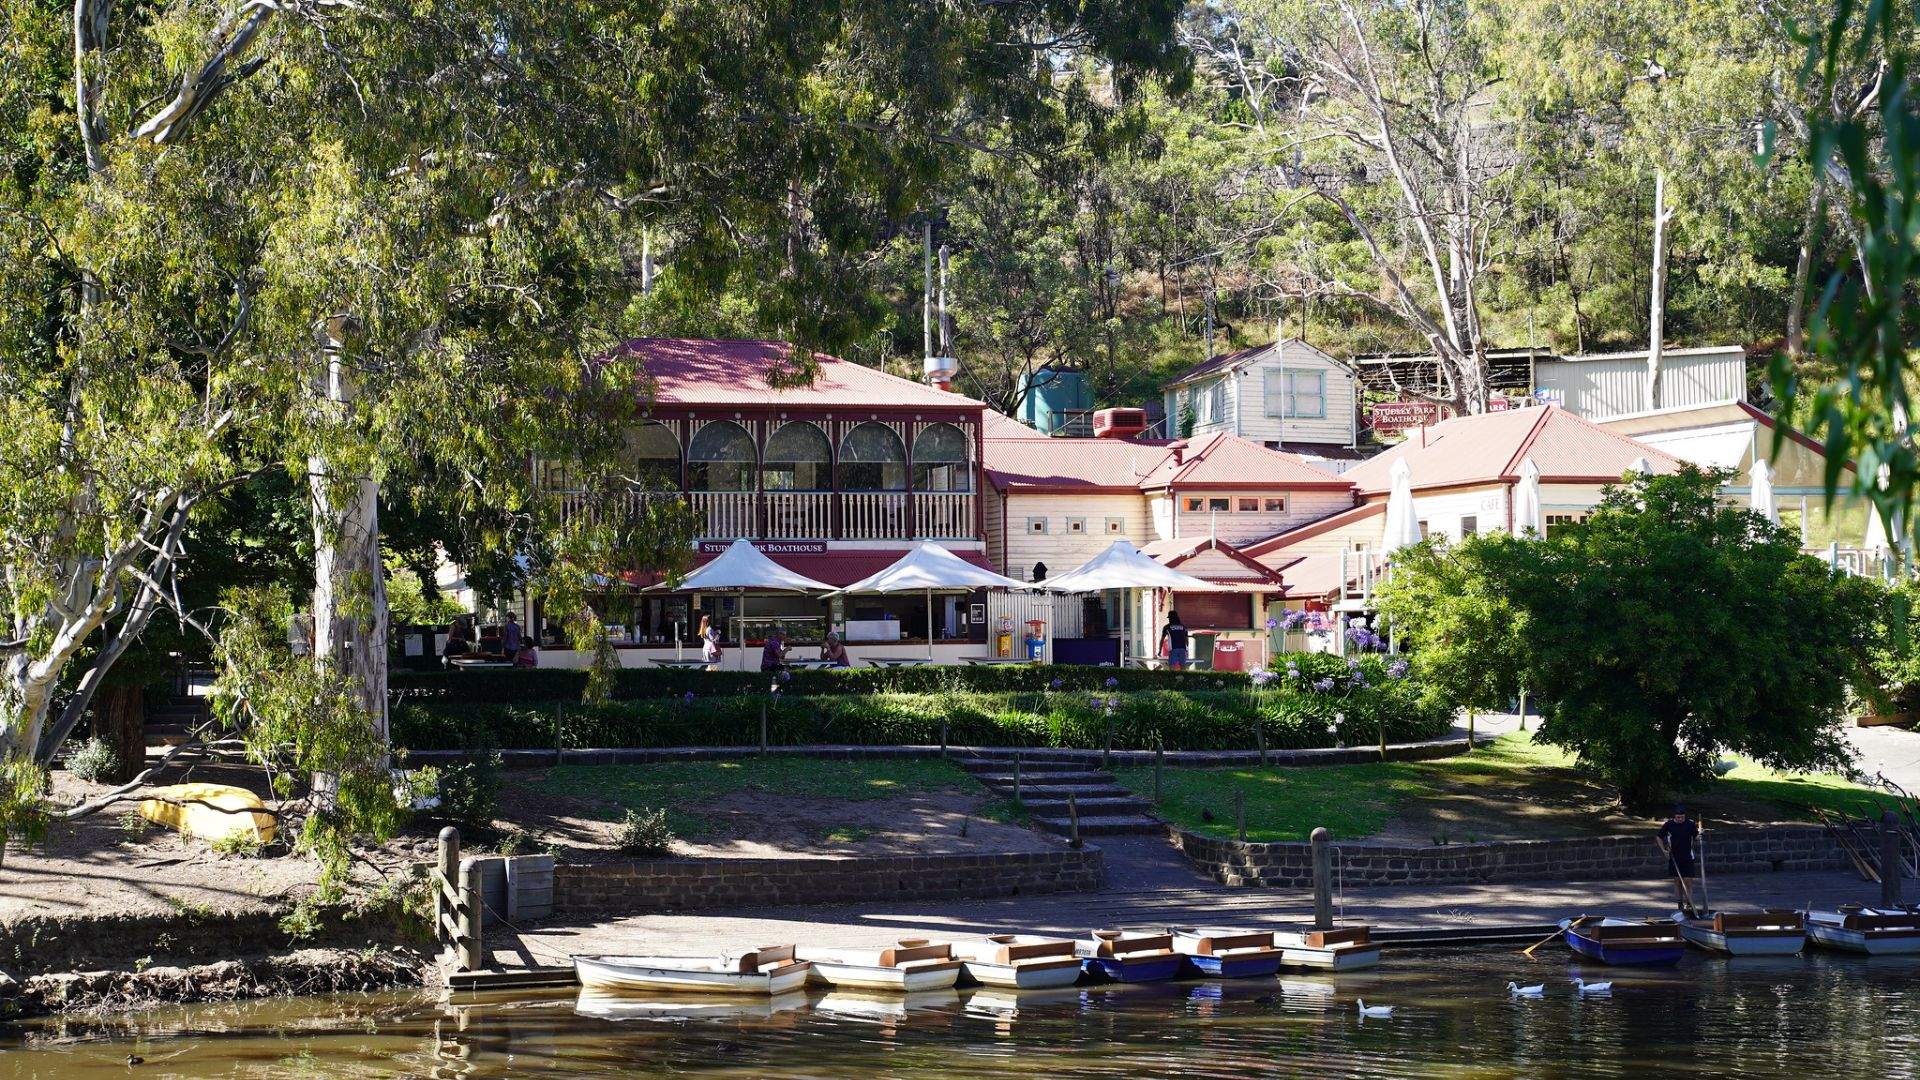 Just In: Studley Park Boathouse Is Reopening This August Following a $5.8-Million Makeover